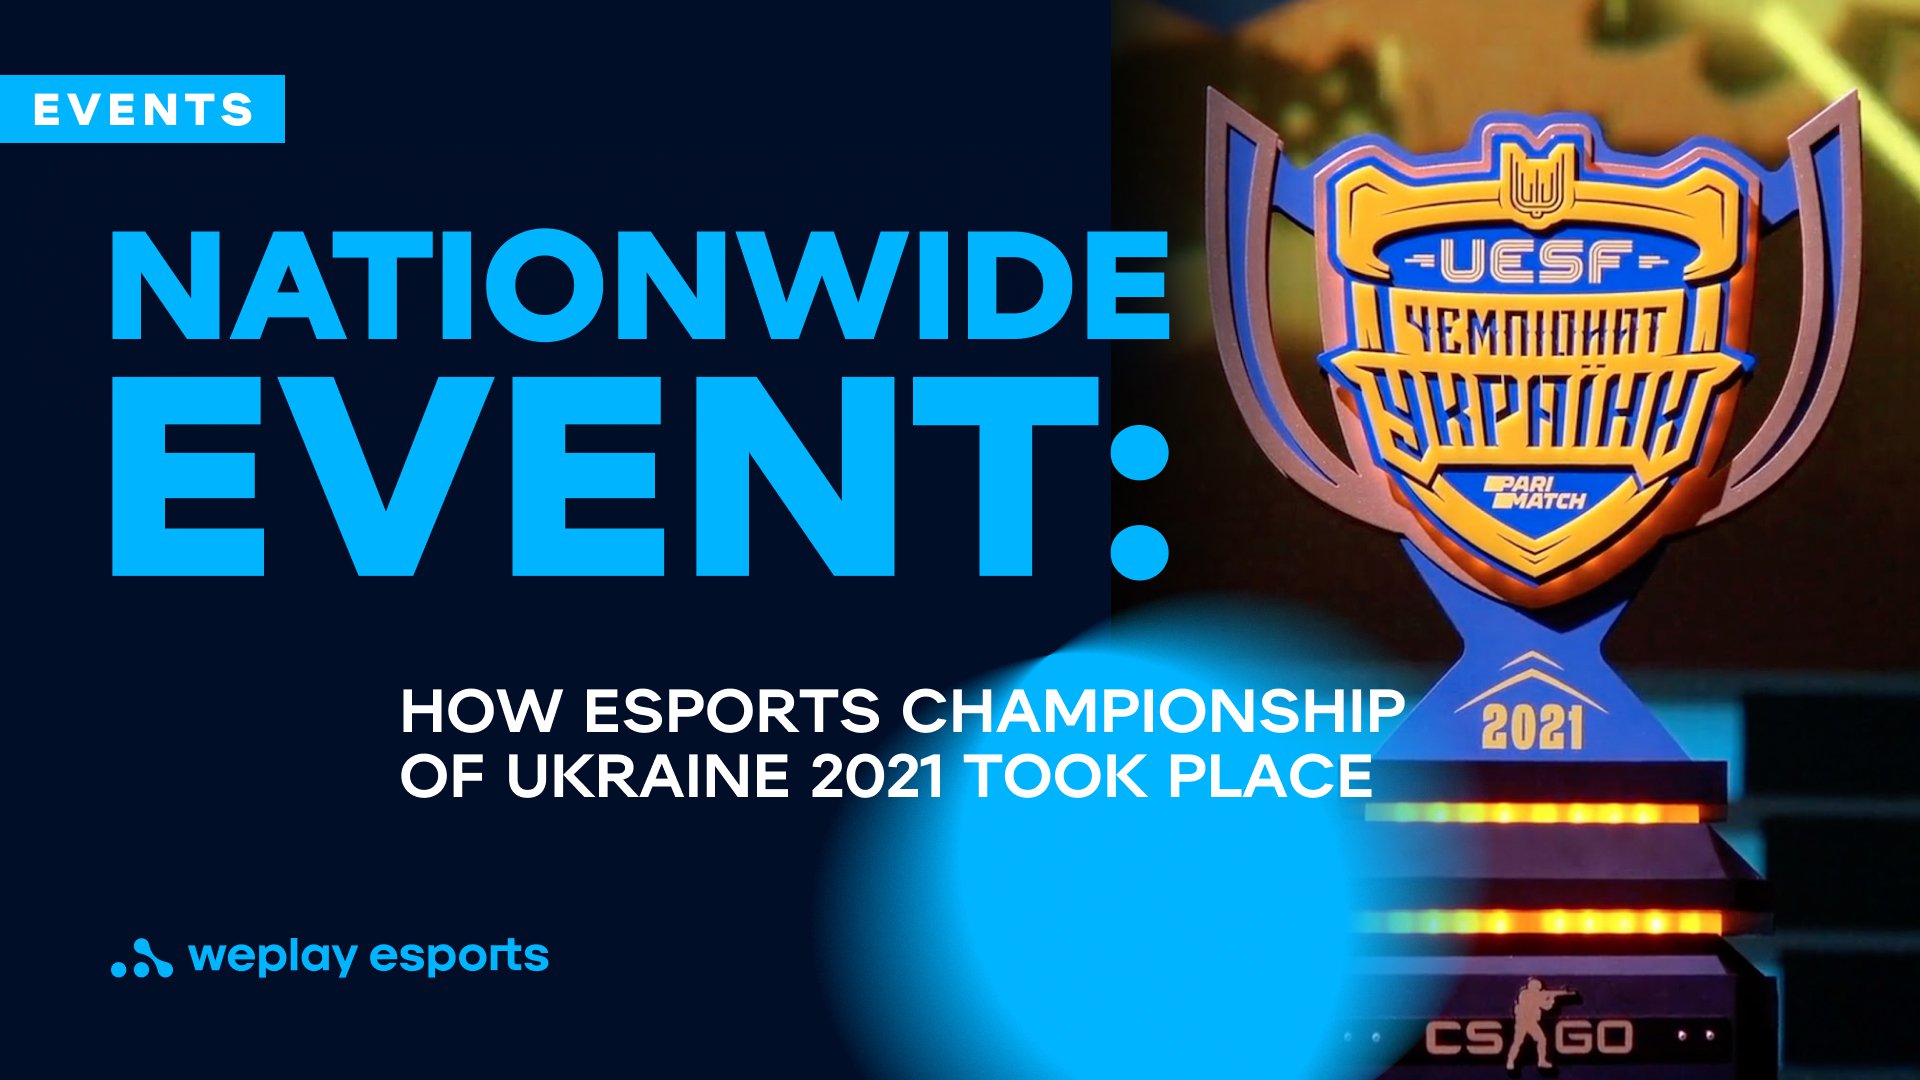 Nationwide event: How Esports Championship of Ukraine 2021 took place. Photo: UESF